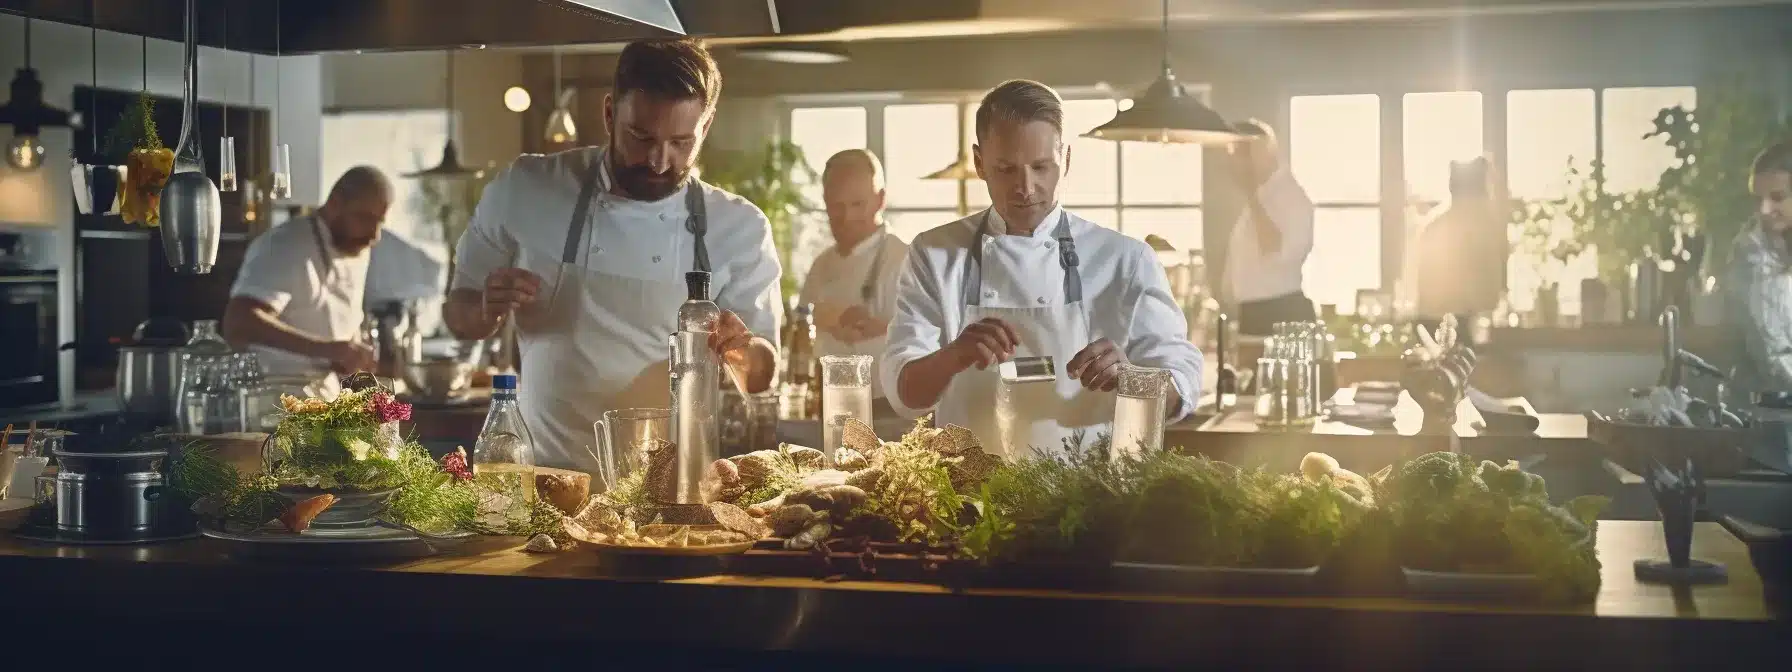 A Group Of Chefs Blending And Cooking Ingredients Together In A Bustling Kitchen.